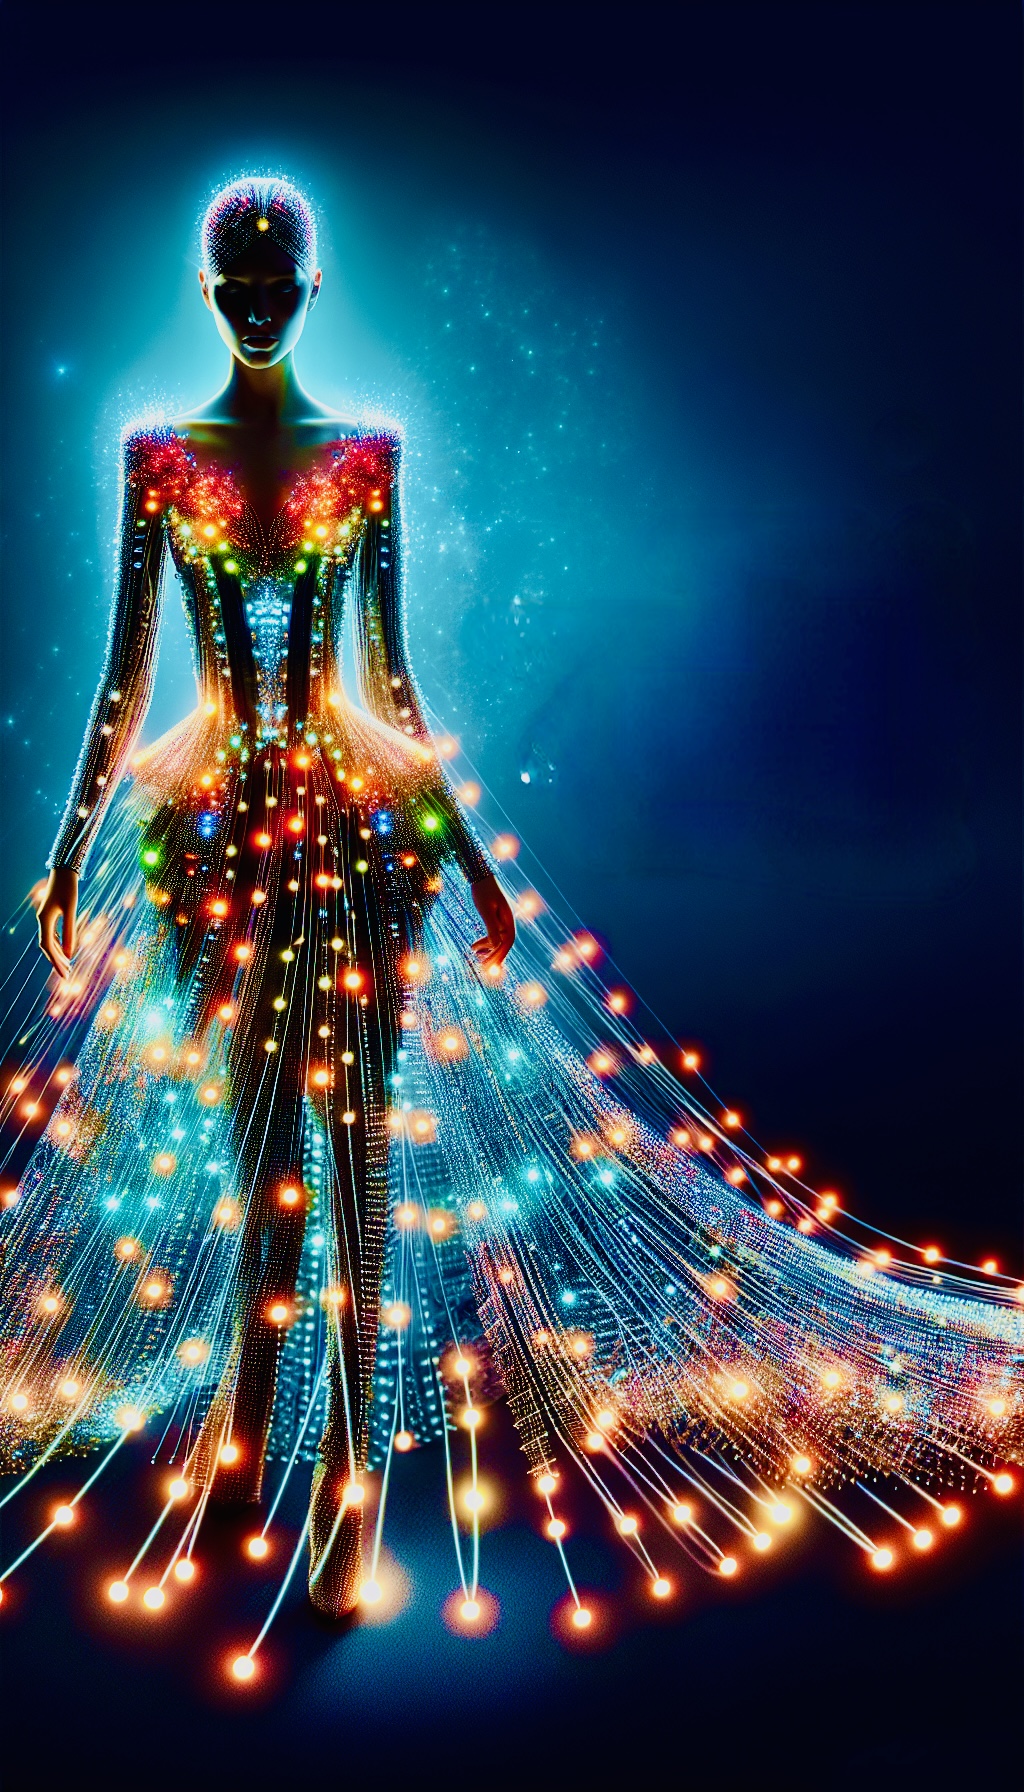 sparkly electronic fashion of the future